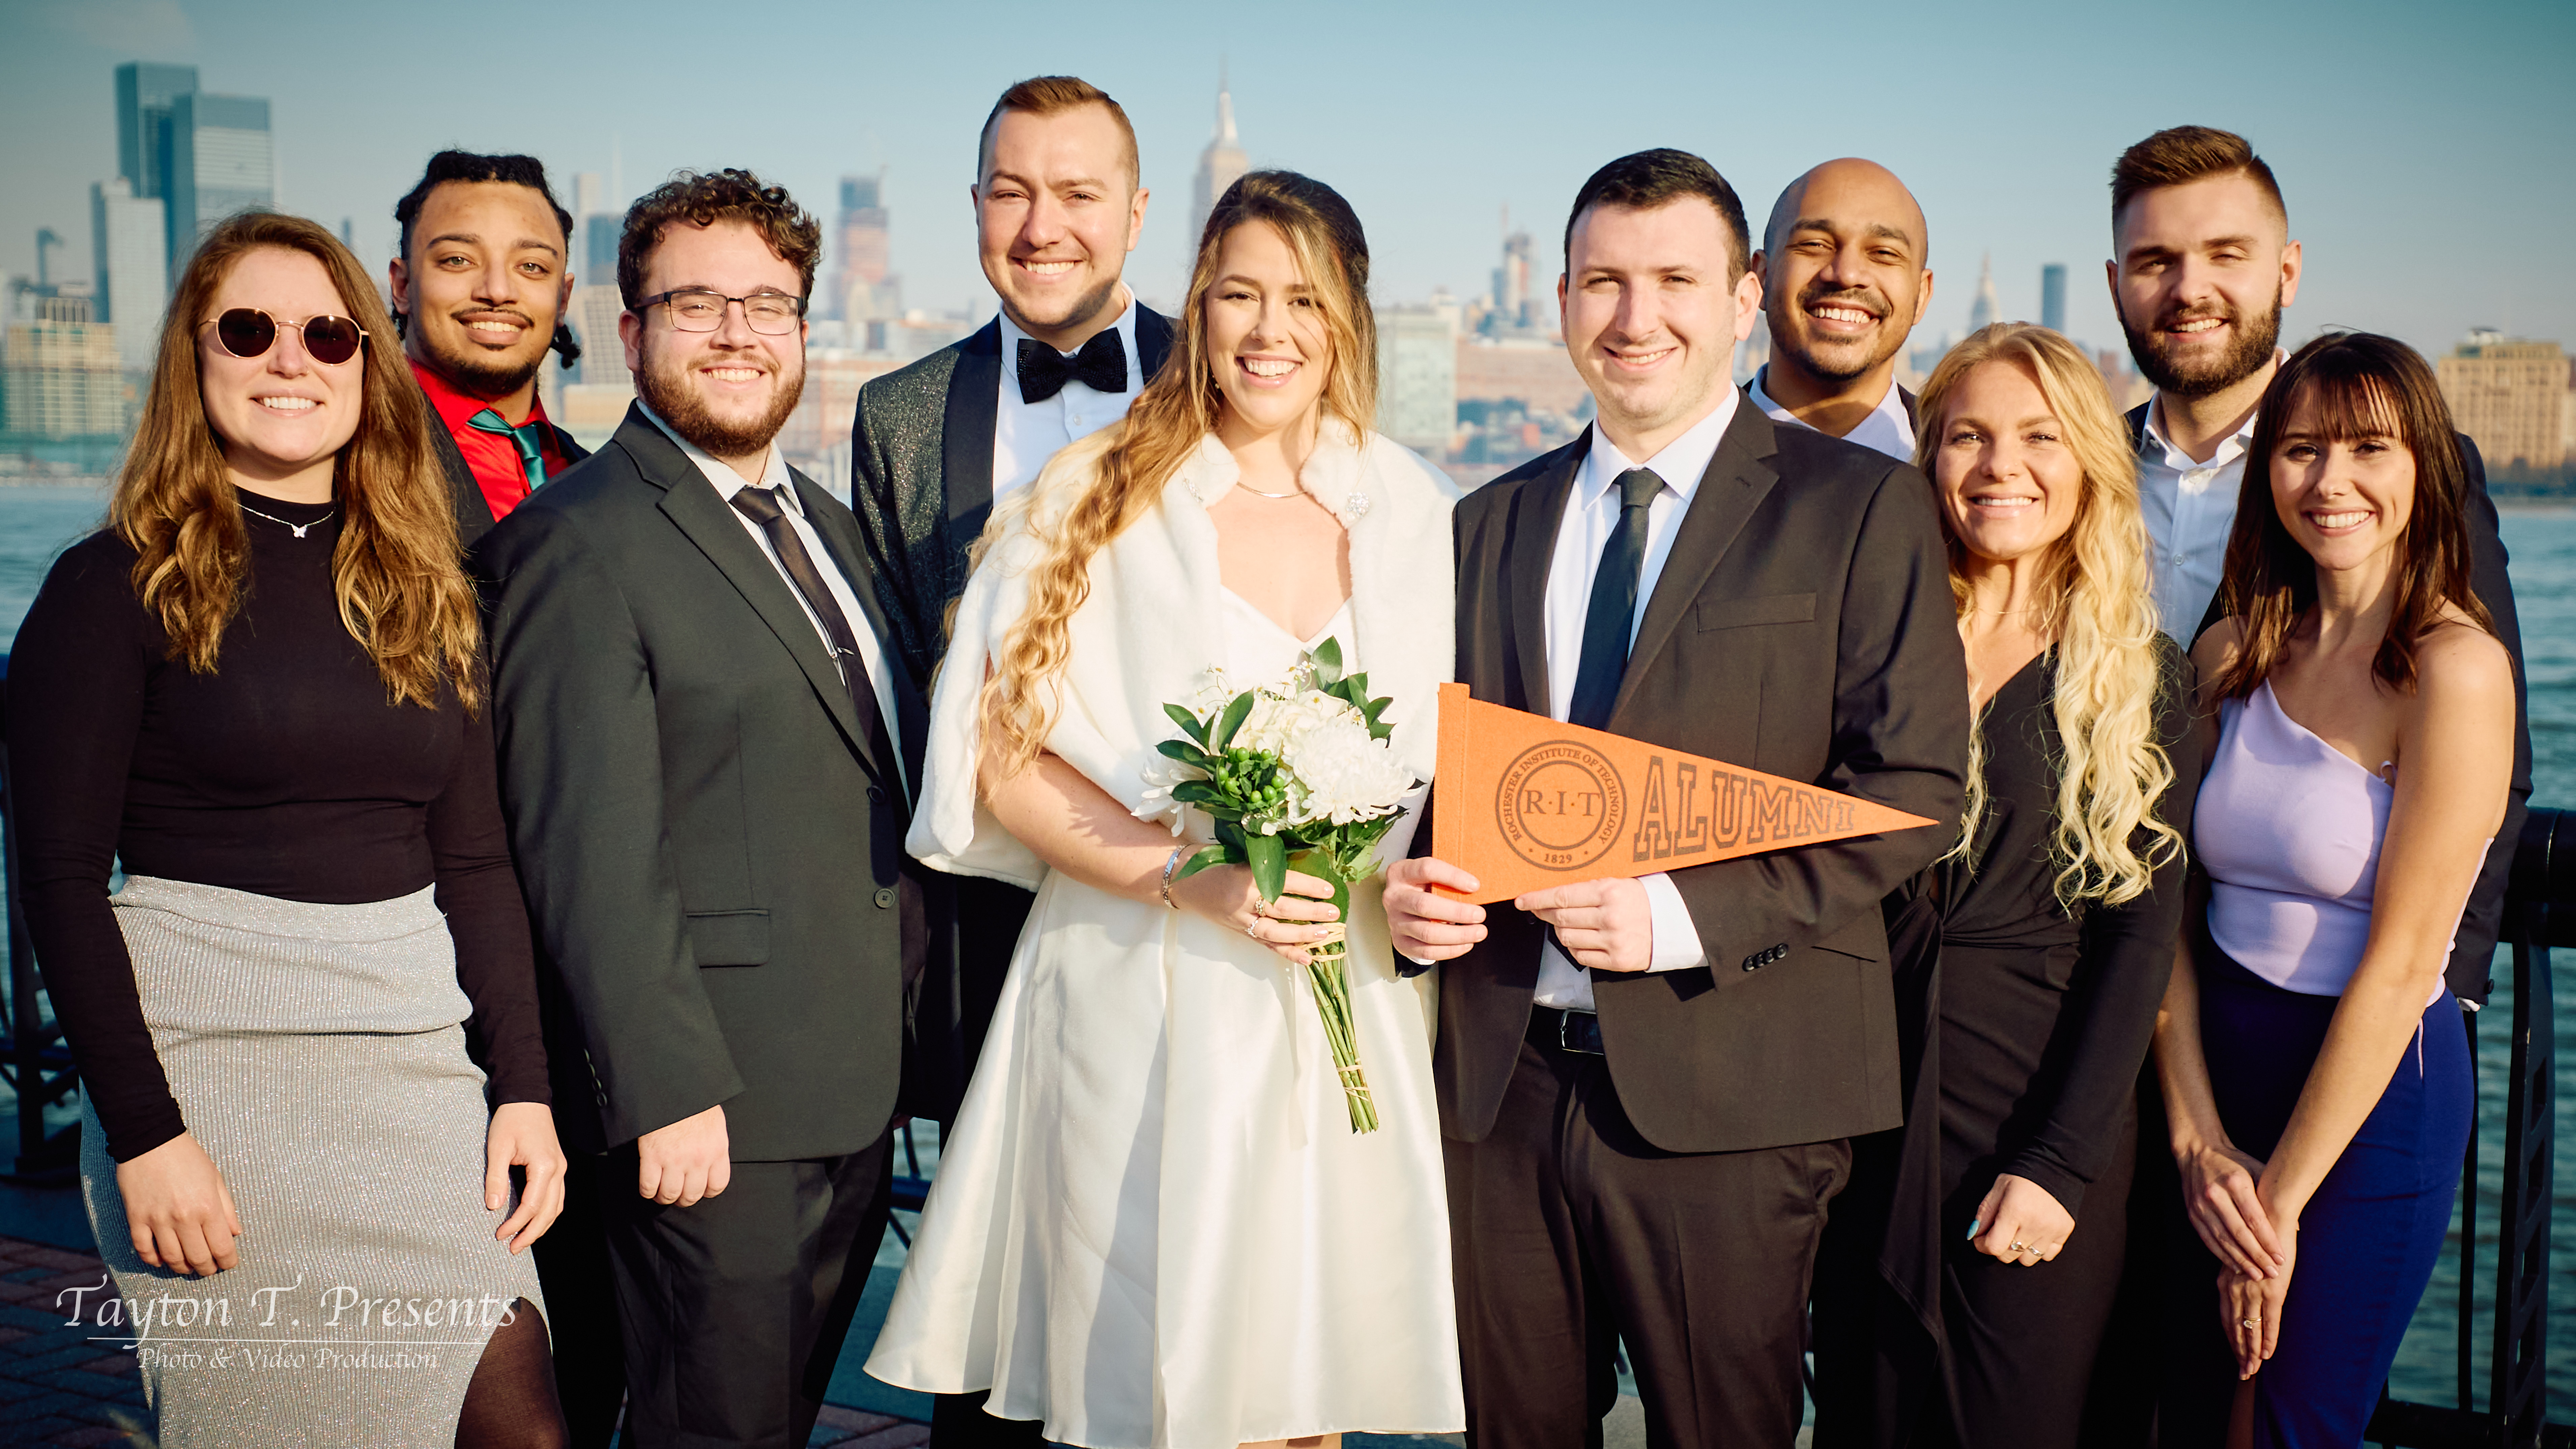 a group of people posing for a wedding group photo with a skyline backdrop